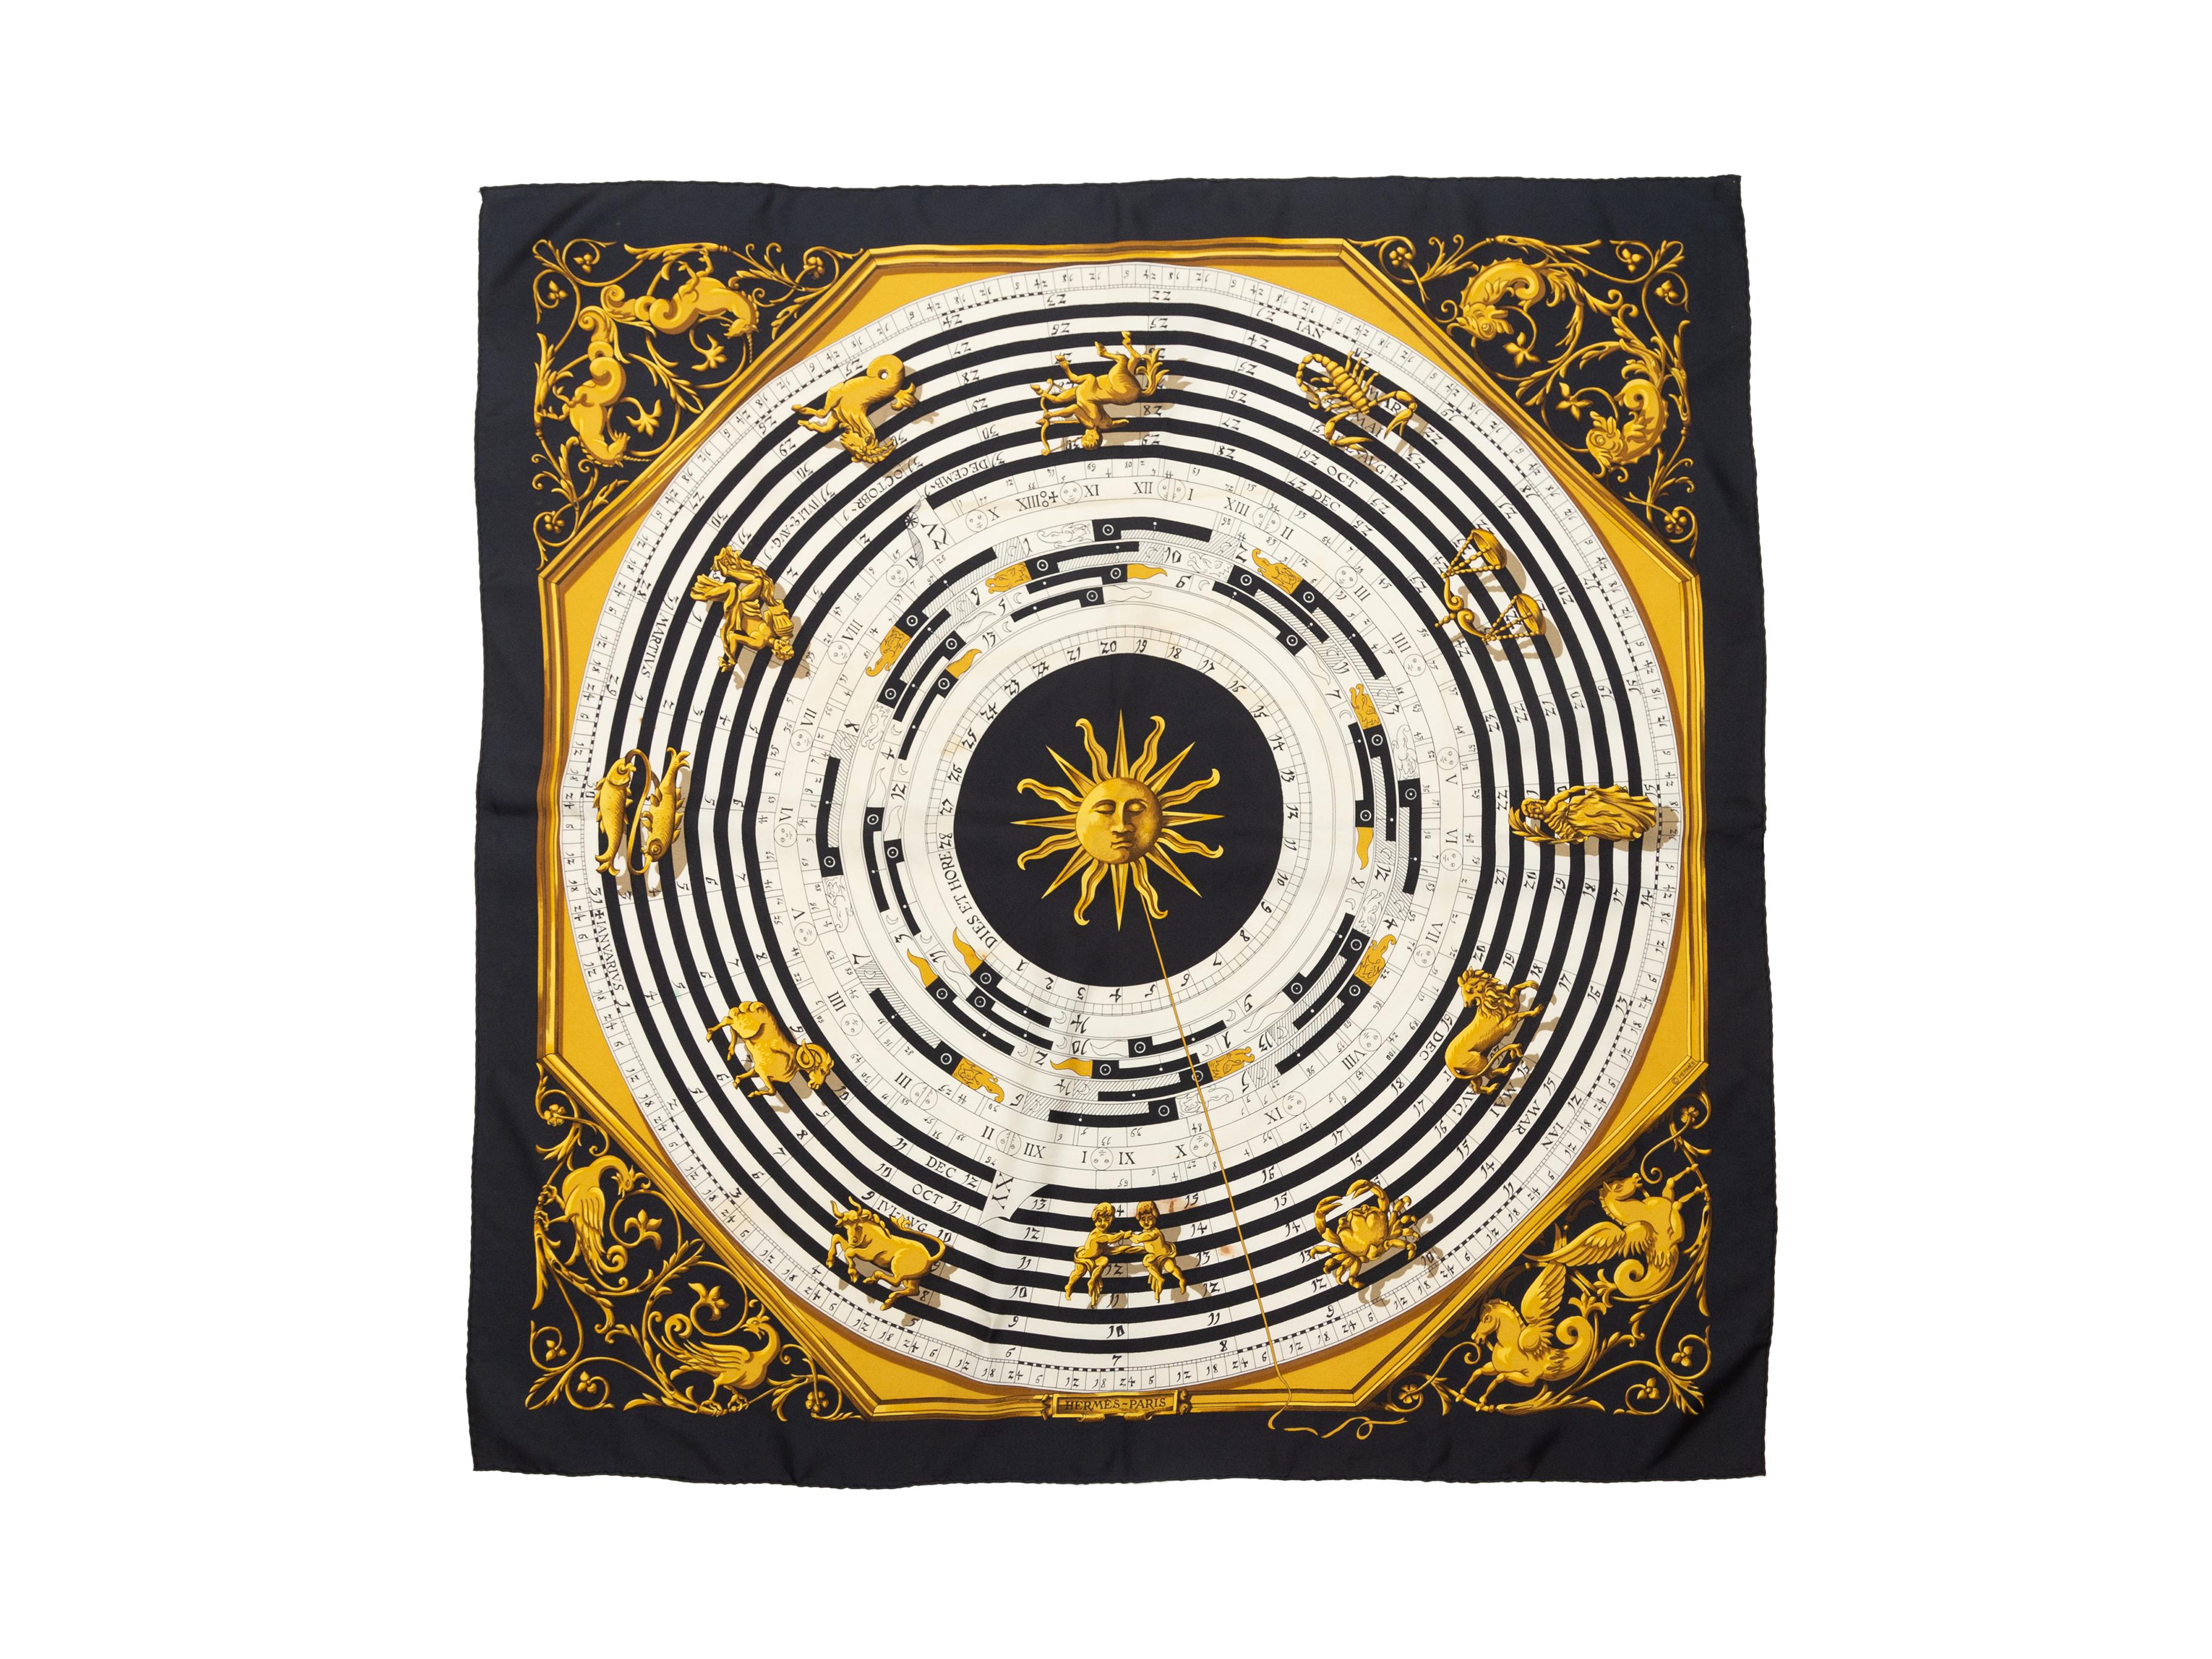 Product details: Black, white, and gold Dies Et Hore motif silk scarf by Hermes. 34